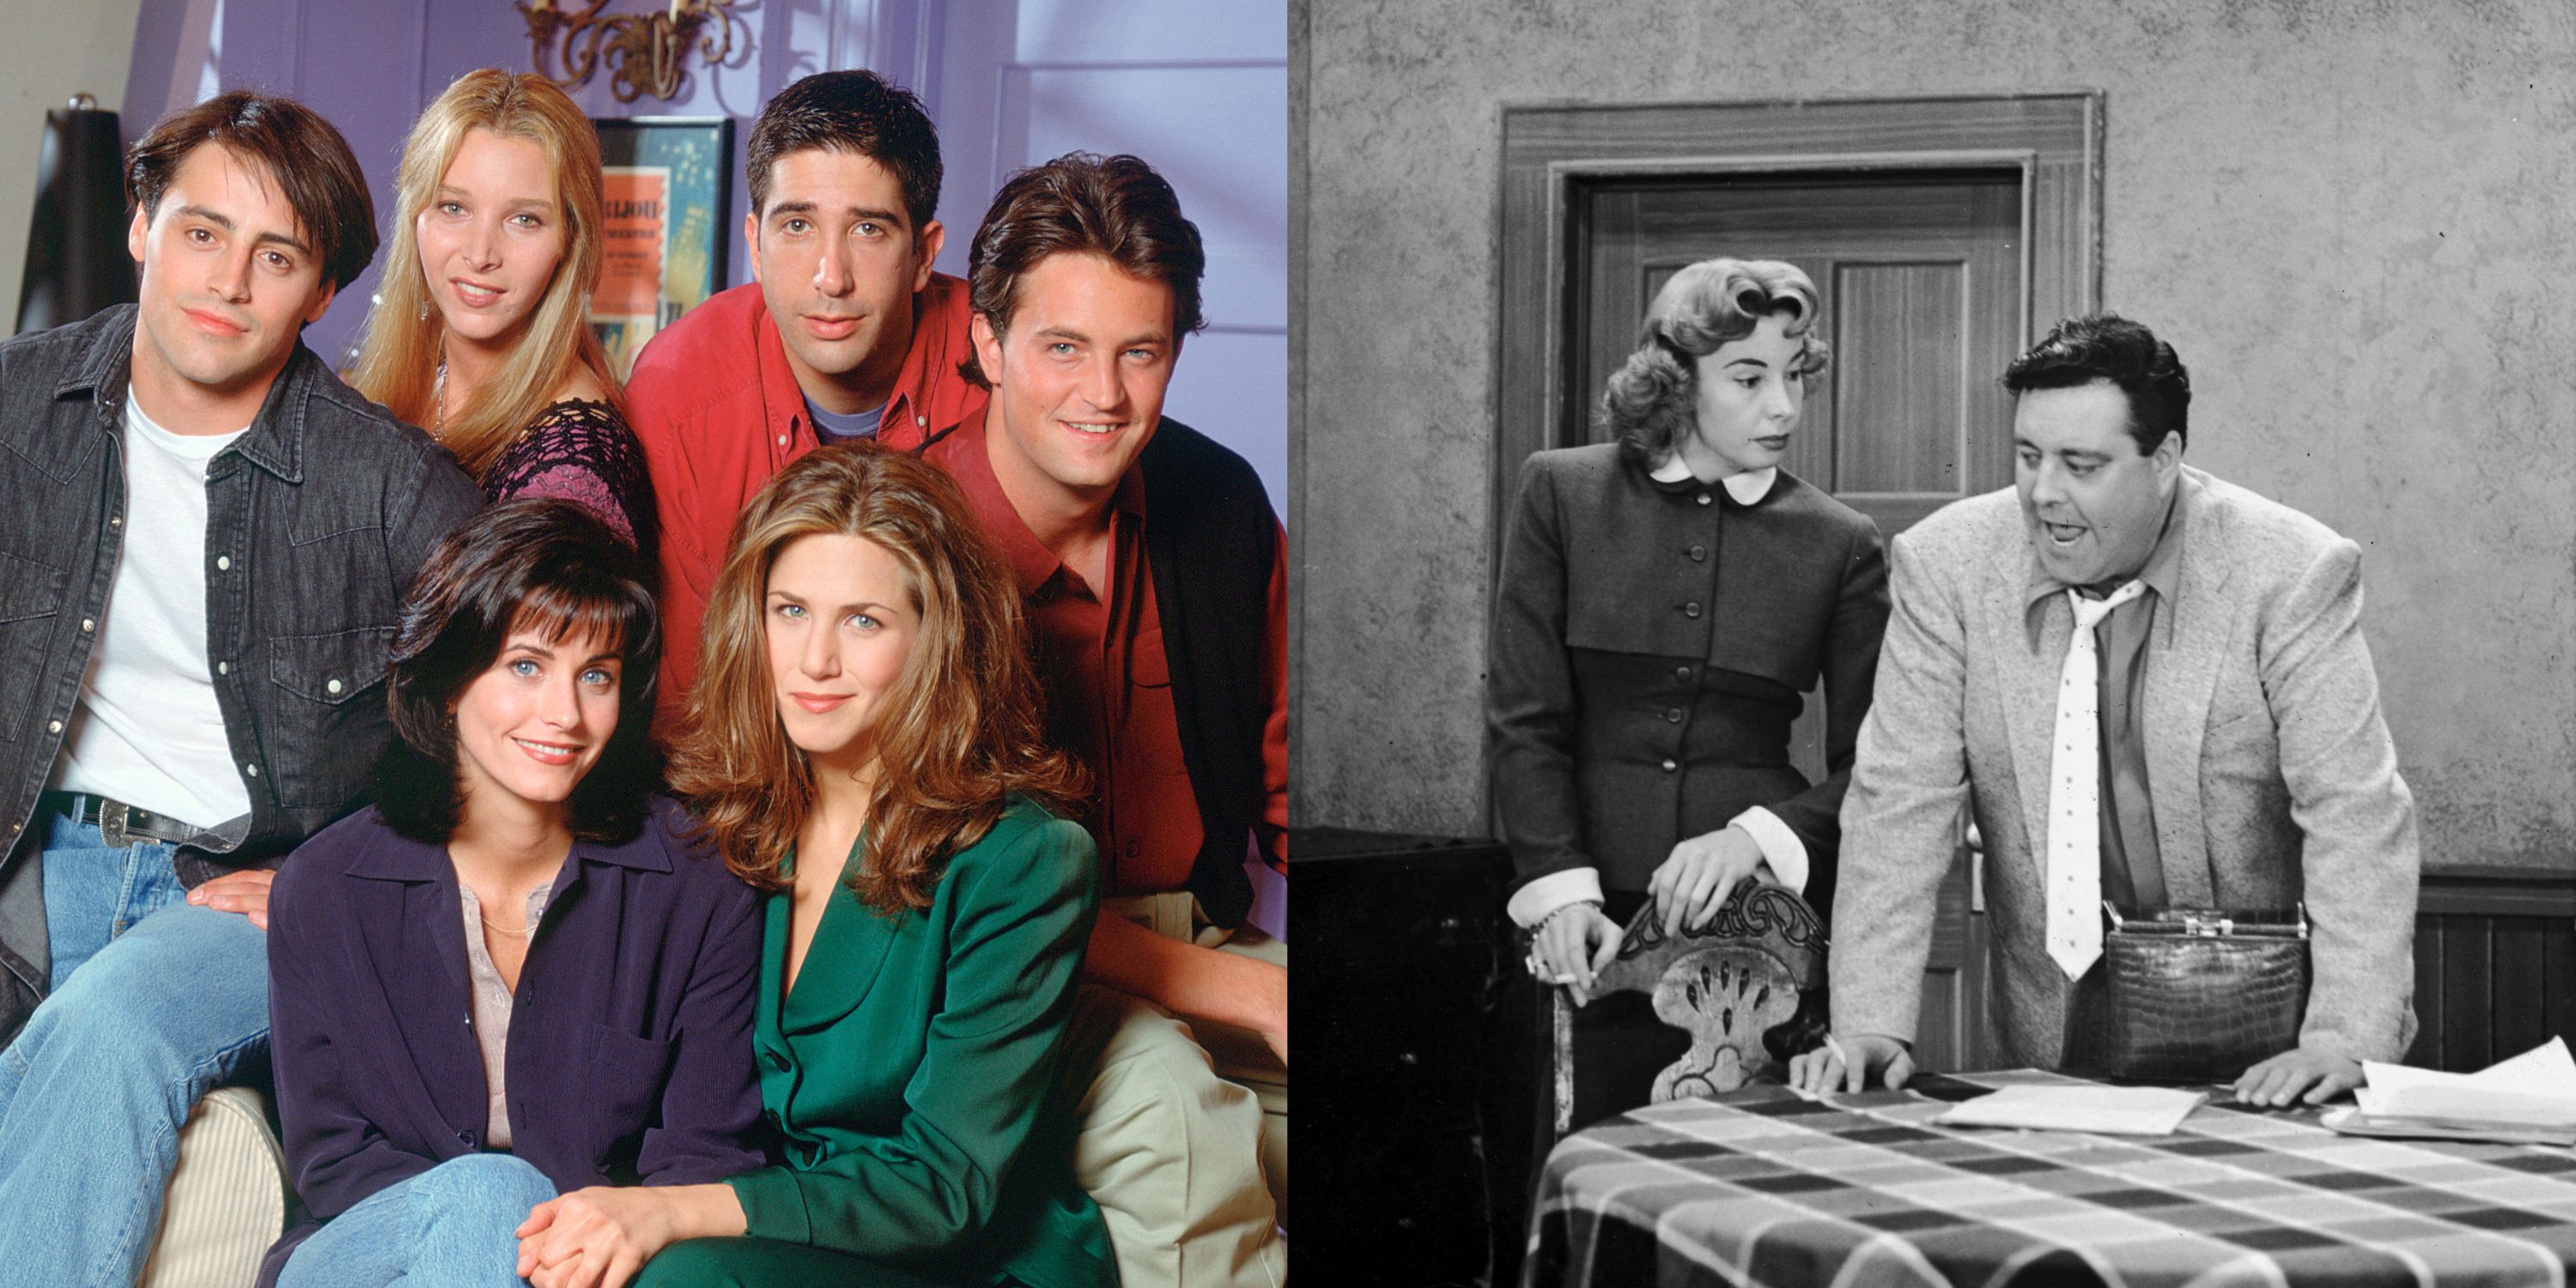 Stills from Friends, and The Honeymooners